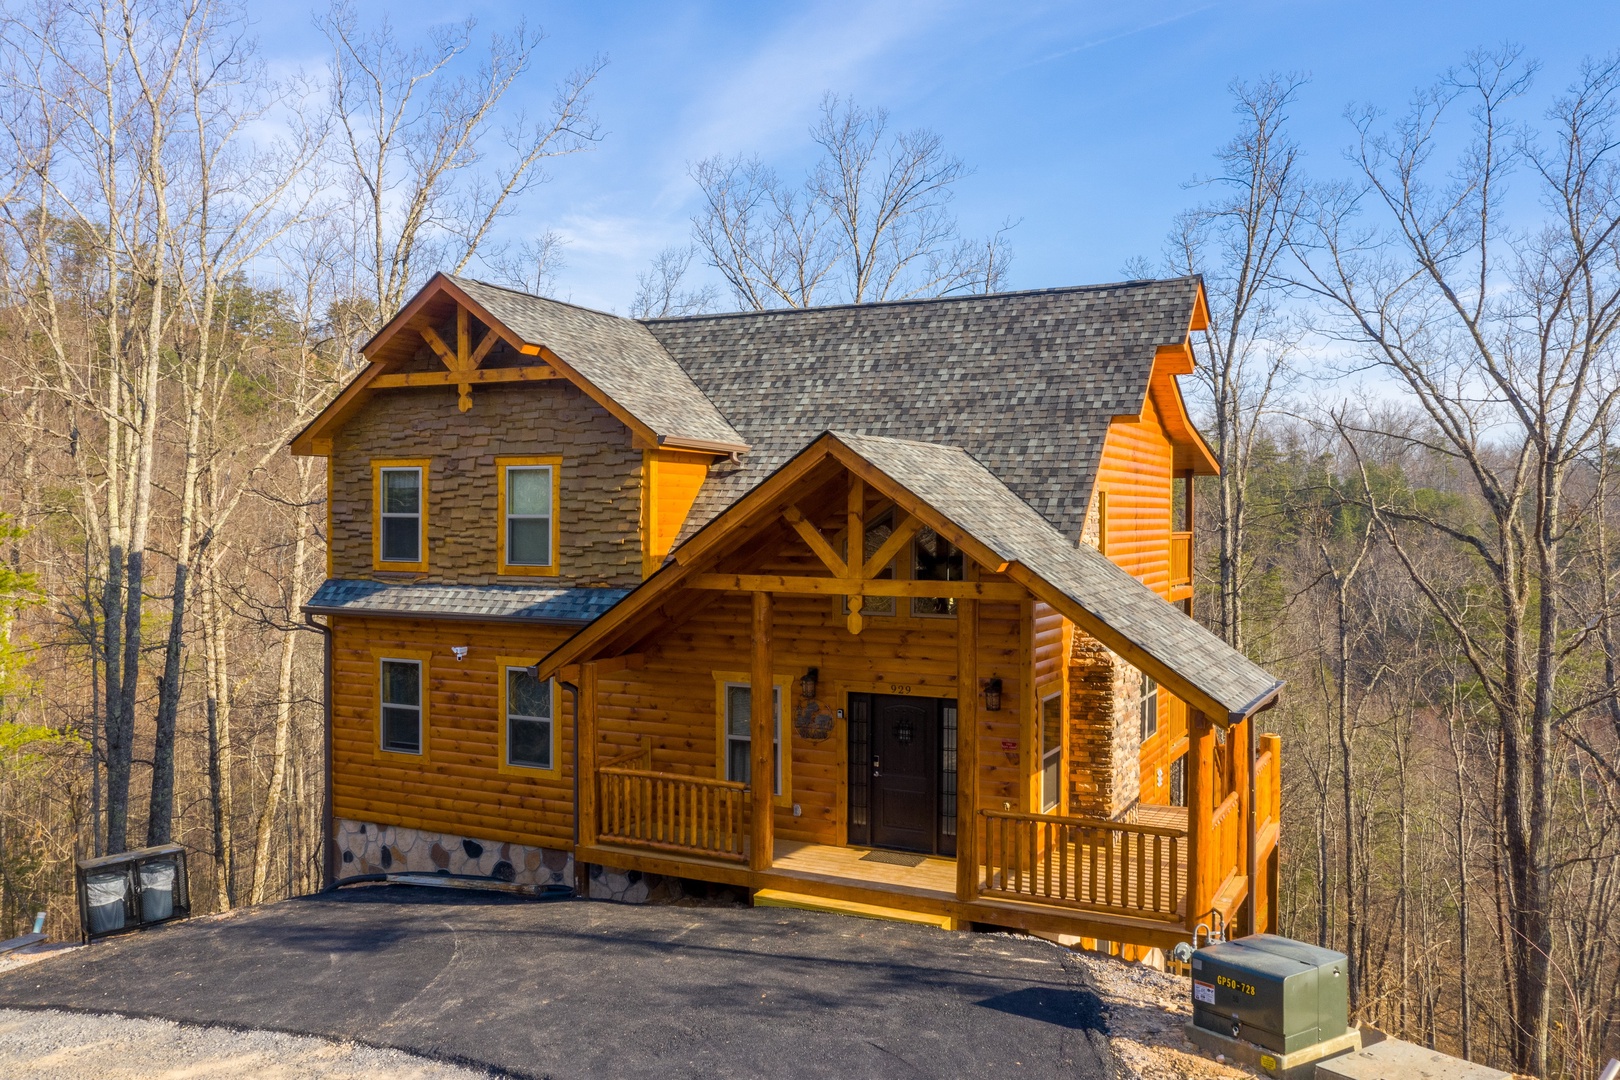 Everly's Splash, a 4 bedroom cabin rental located in Pigeon Forge